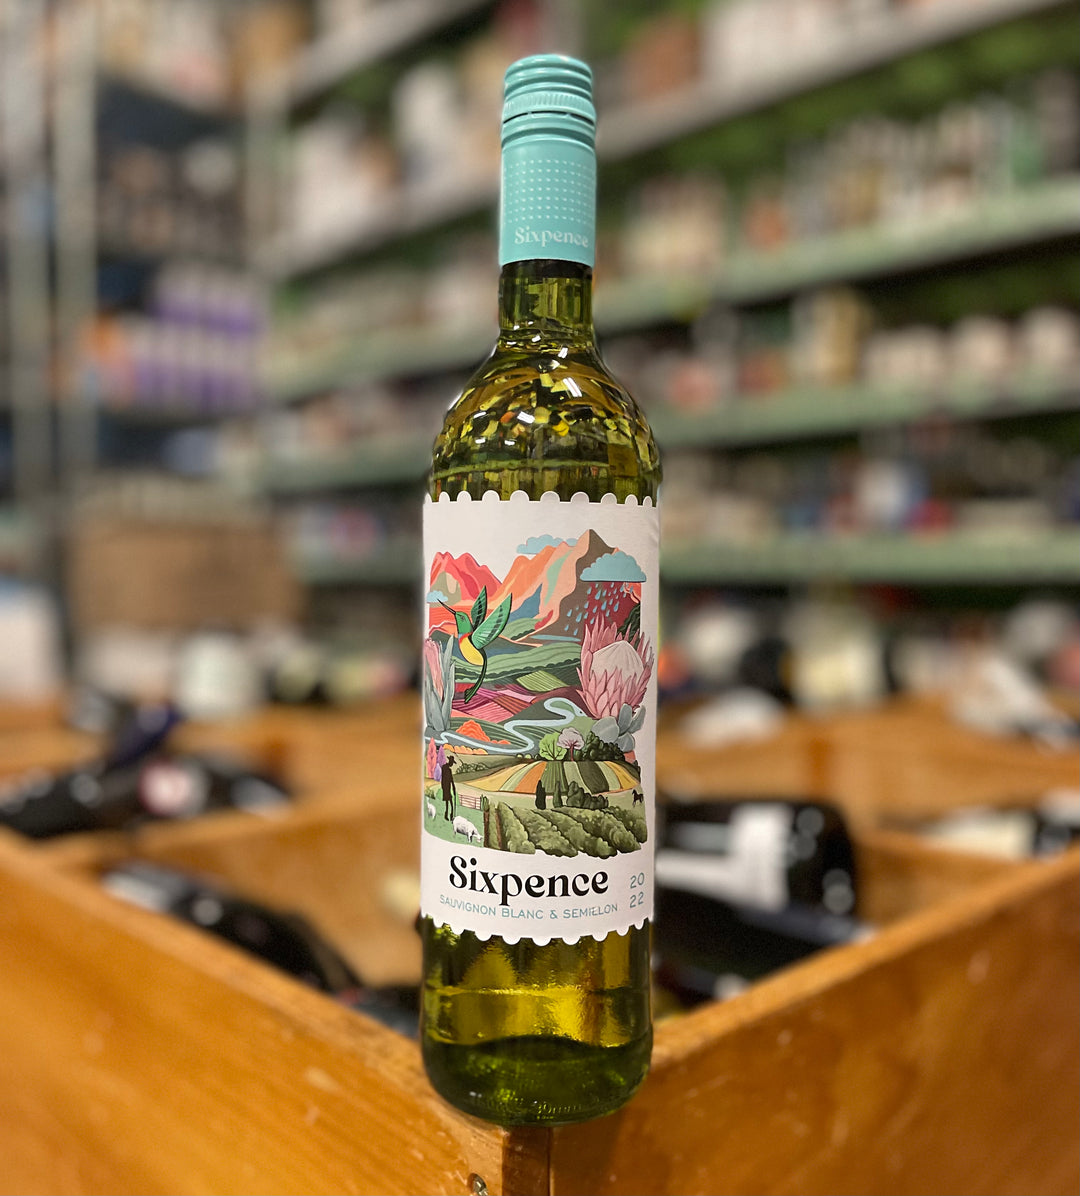 Opstal Wines Sixpence Proprietary White Breedecloof, South Africa